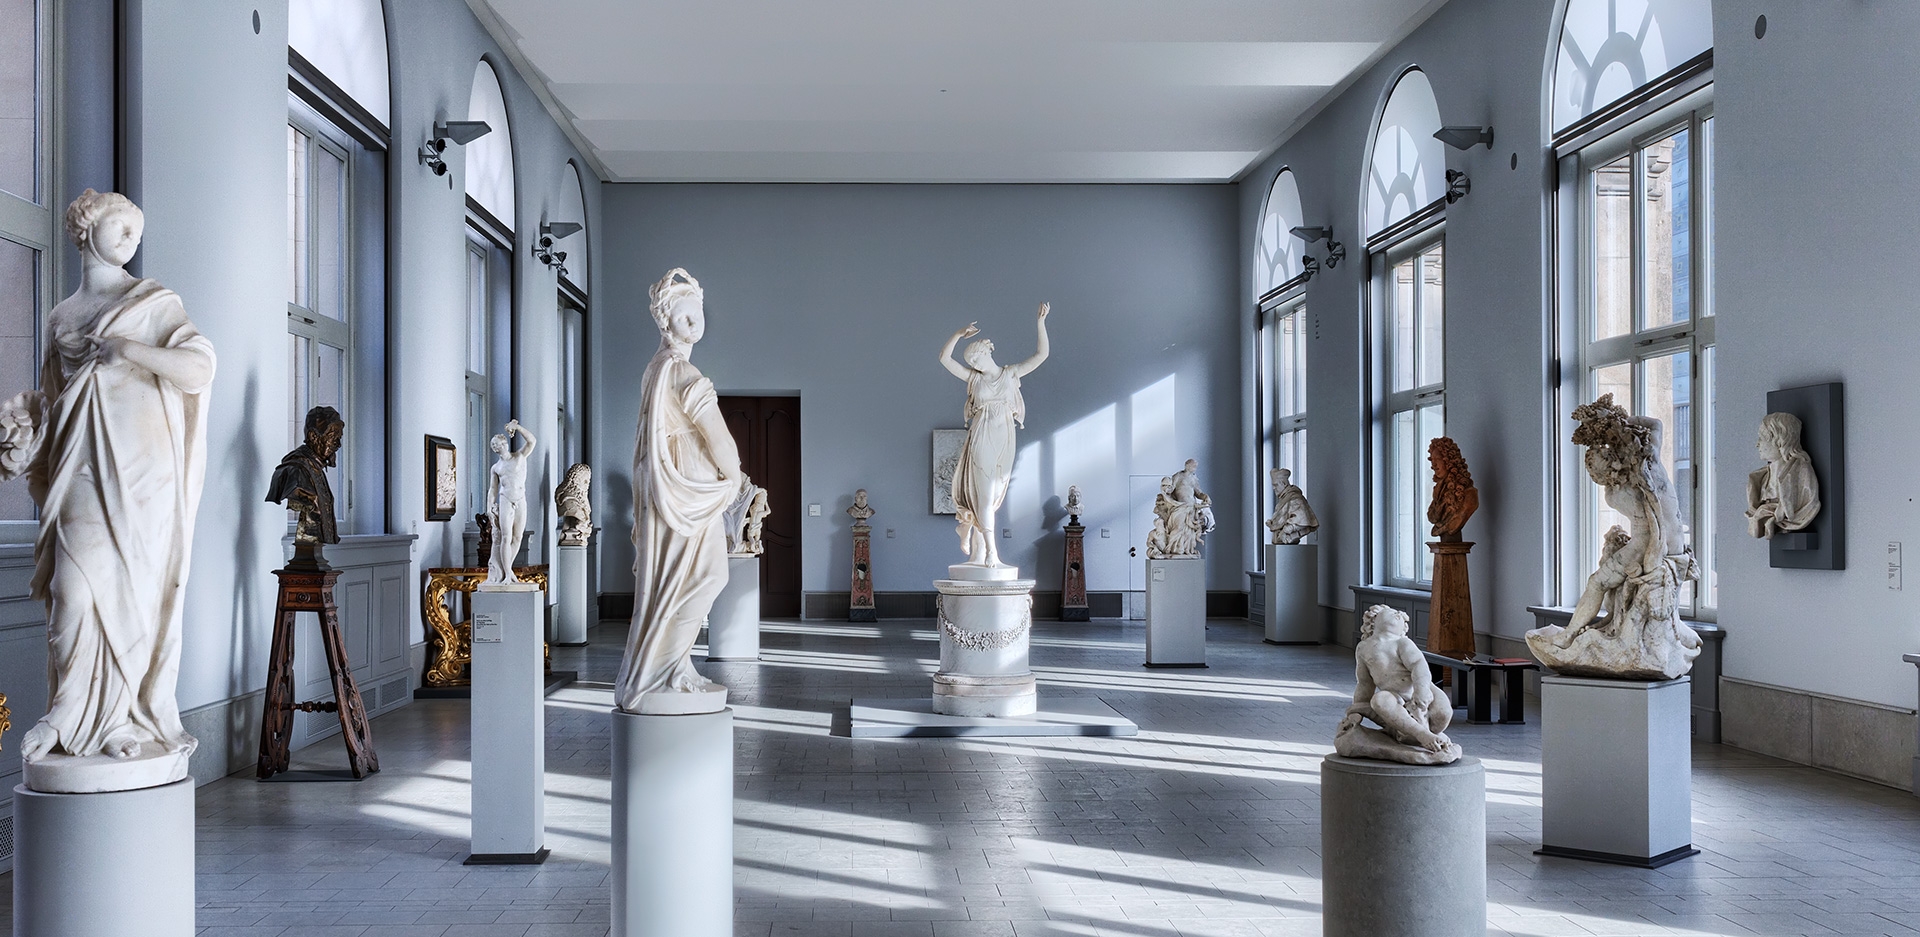 TOP 10 Iconic Museums and Galleries You Can Visit Virtually From Home